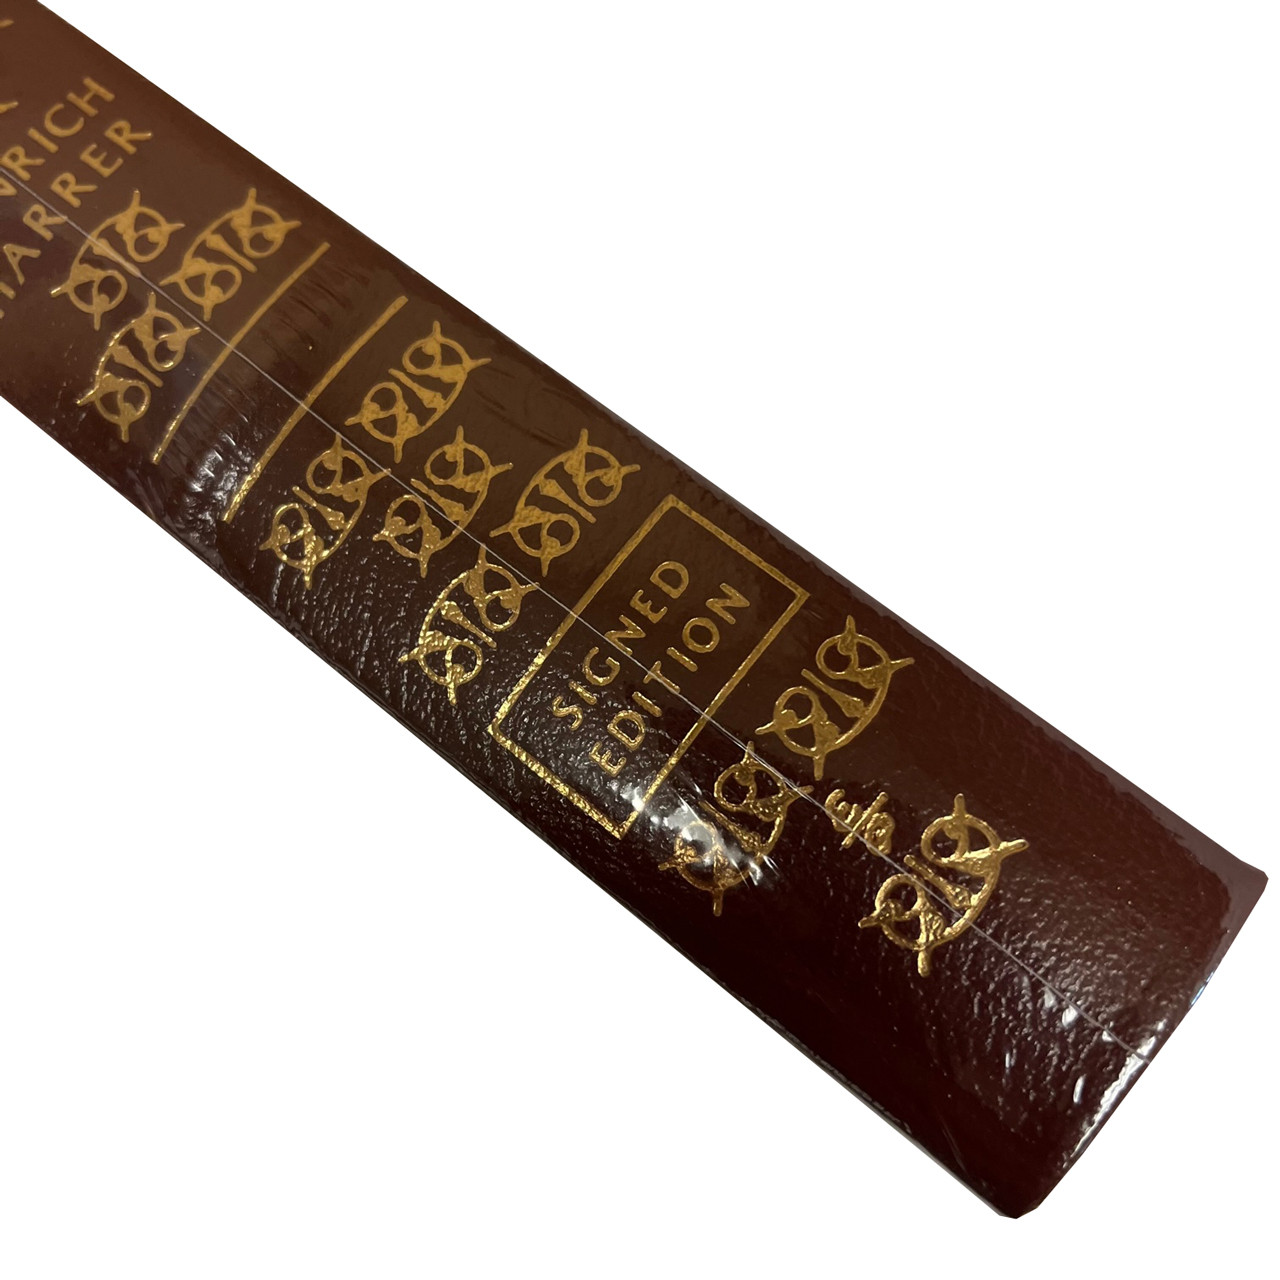 Heinrich Harrer "Seven Years In Tibet" Signed Limited Edition, Leather-Bound [Sealed]